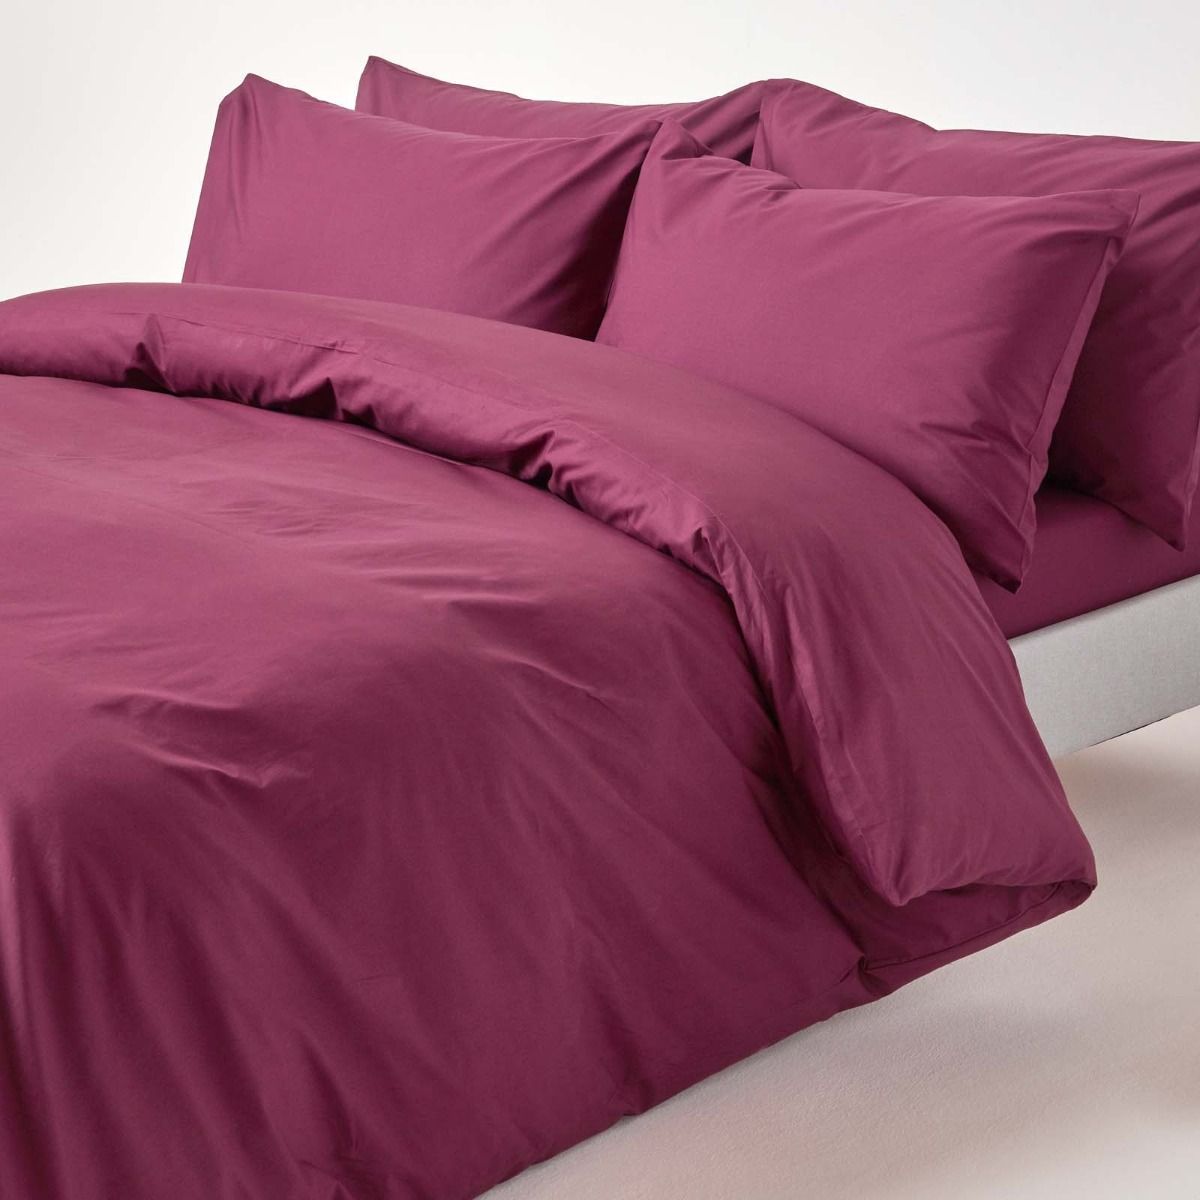 Plum Egyptian Cotton Duvet Cover With, Plum Colored Duvet Covers